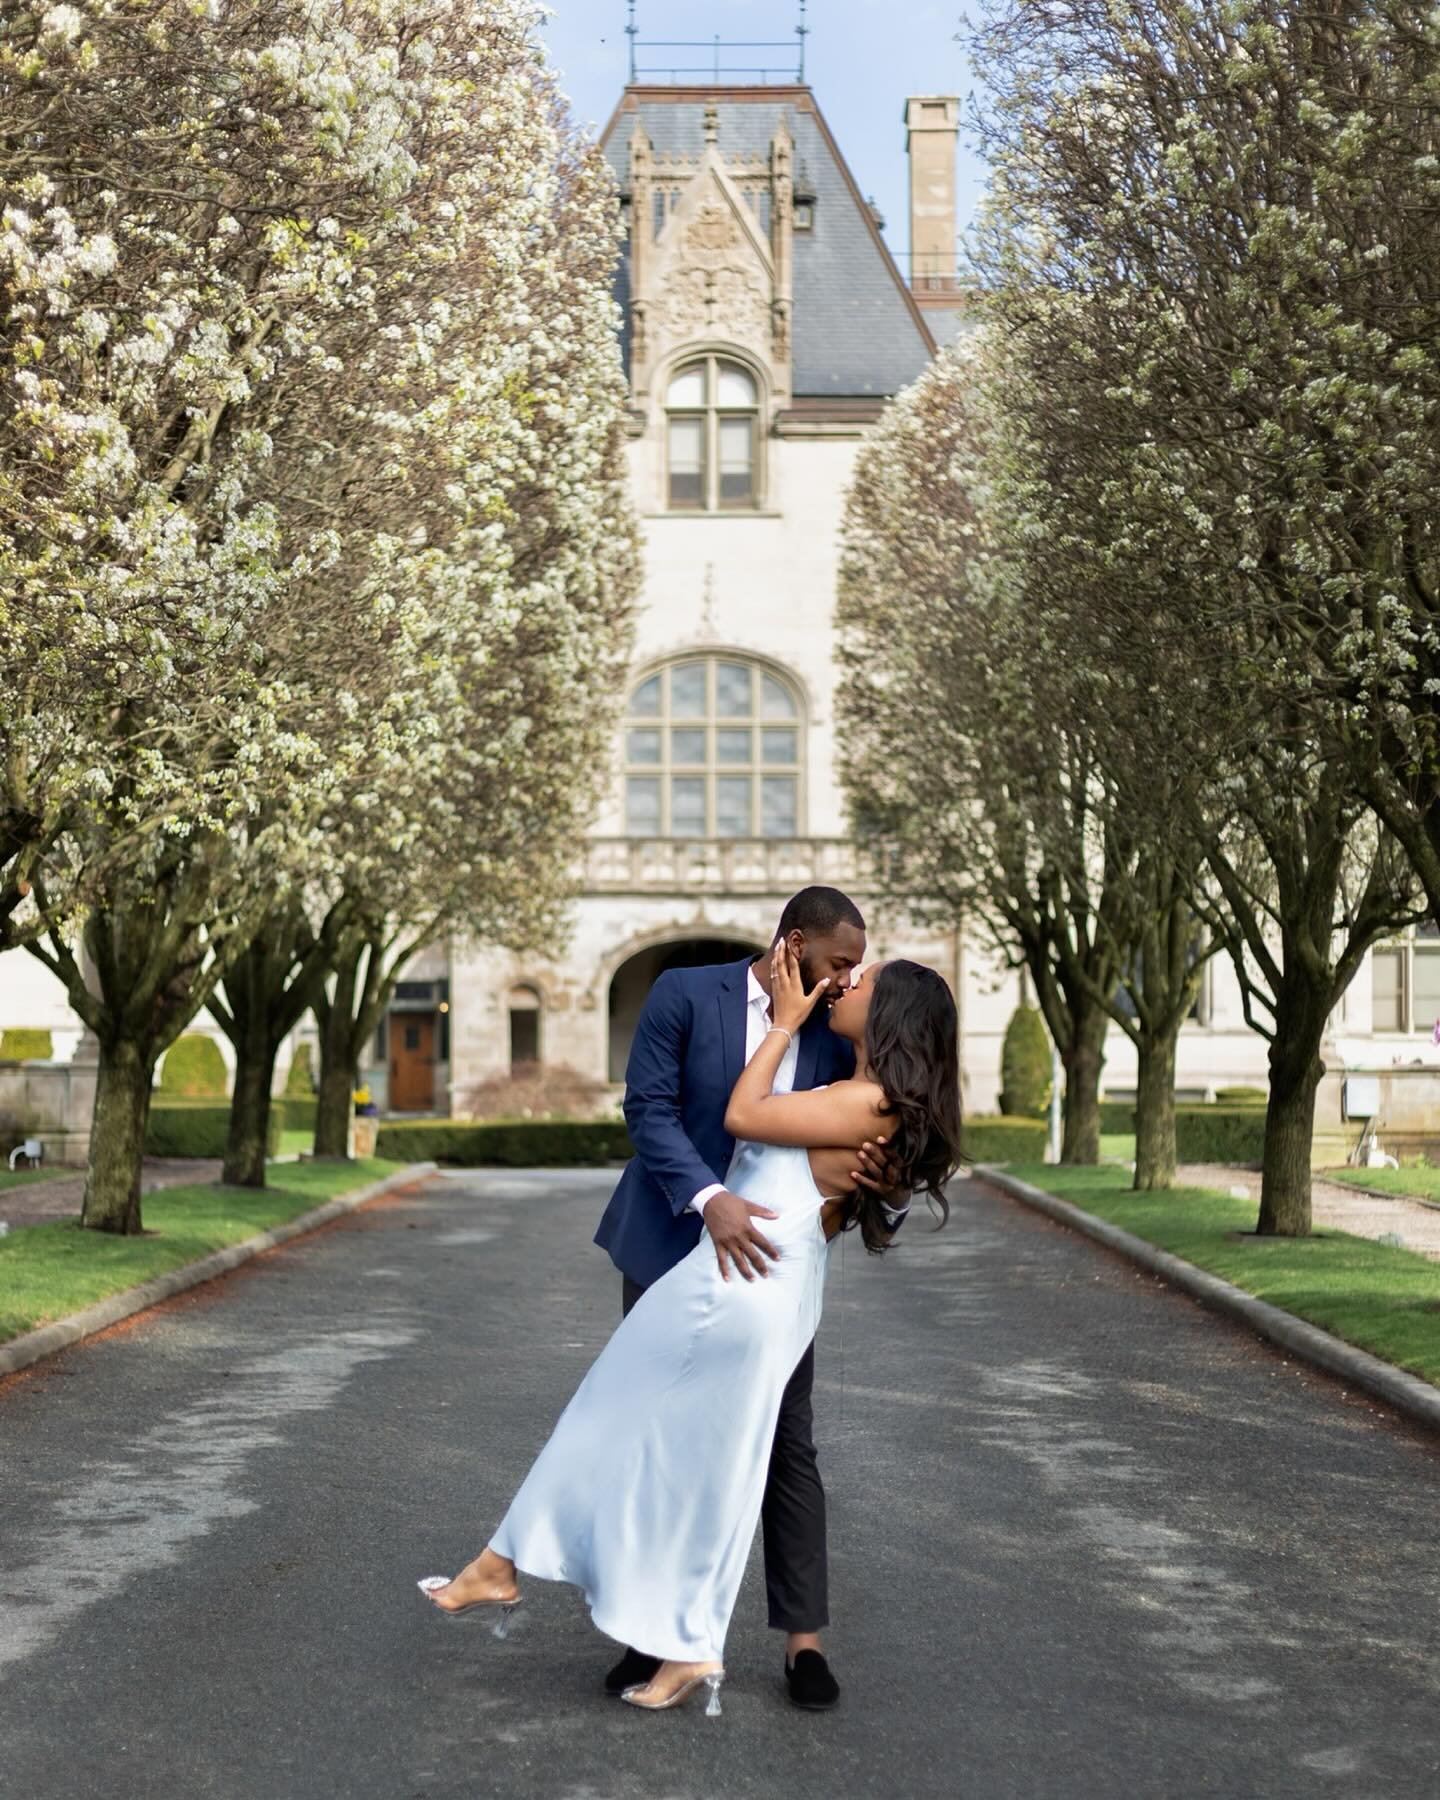 Tanya and Richard&rsquo;s Newport engagement session was an absolute dream! Despite their initial nerves, they quickly settled into the shoot. They looked like royalty and models all at once, effortlessly showcasing their love for each other. Tanya&r